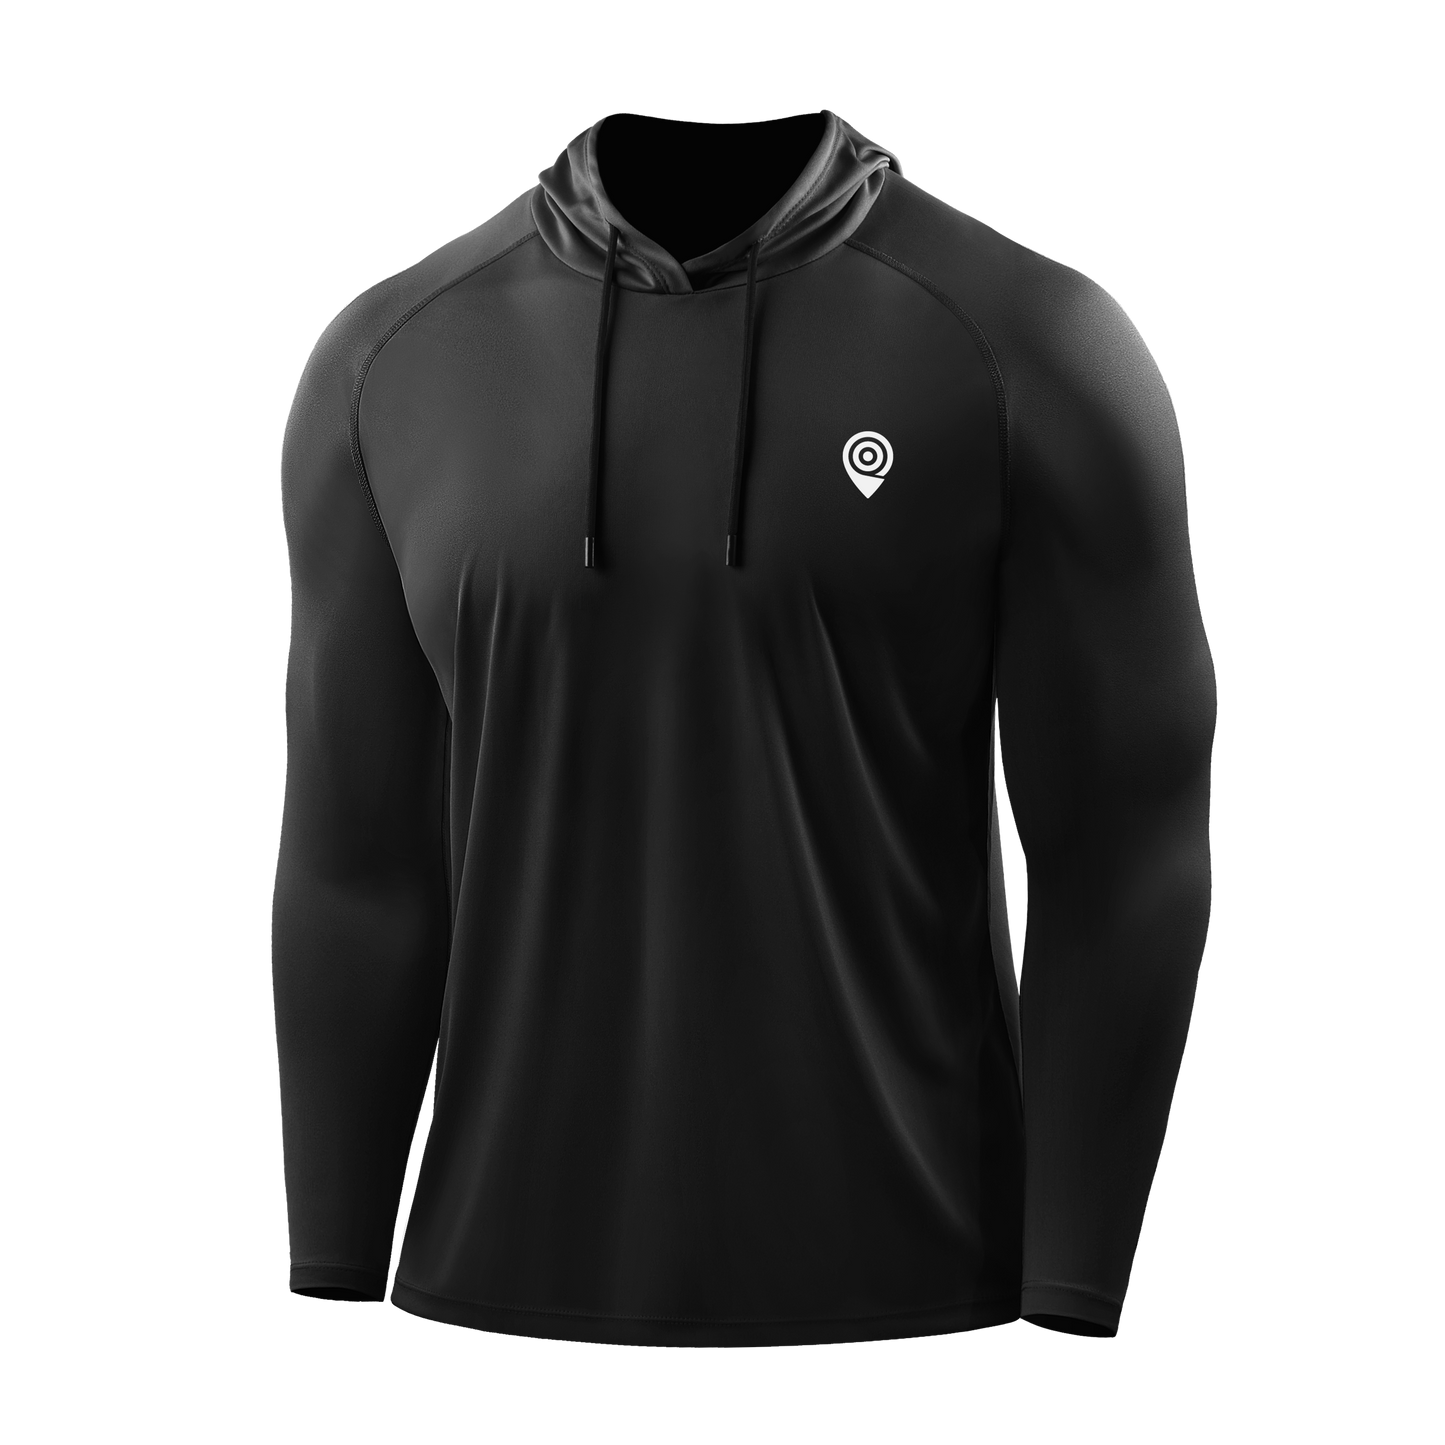 Training Tops - Long Sleeved - Male Fit